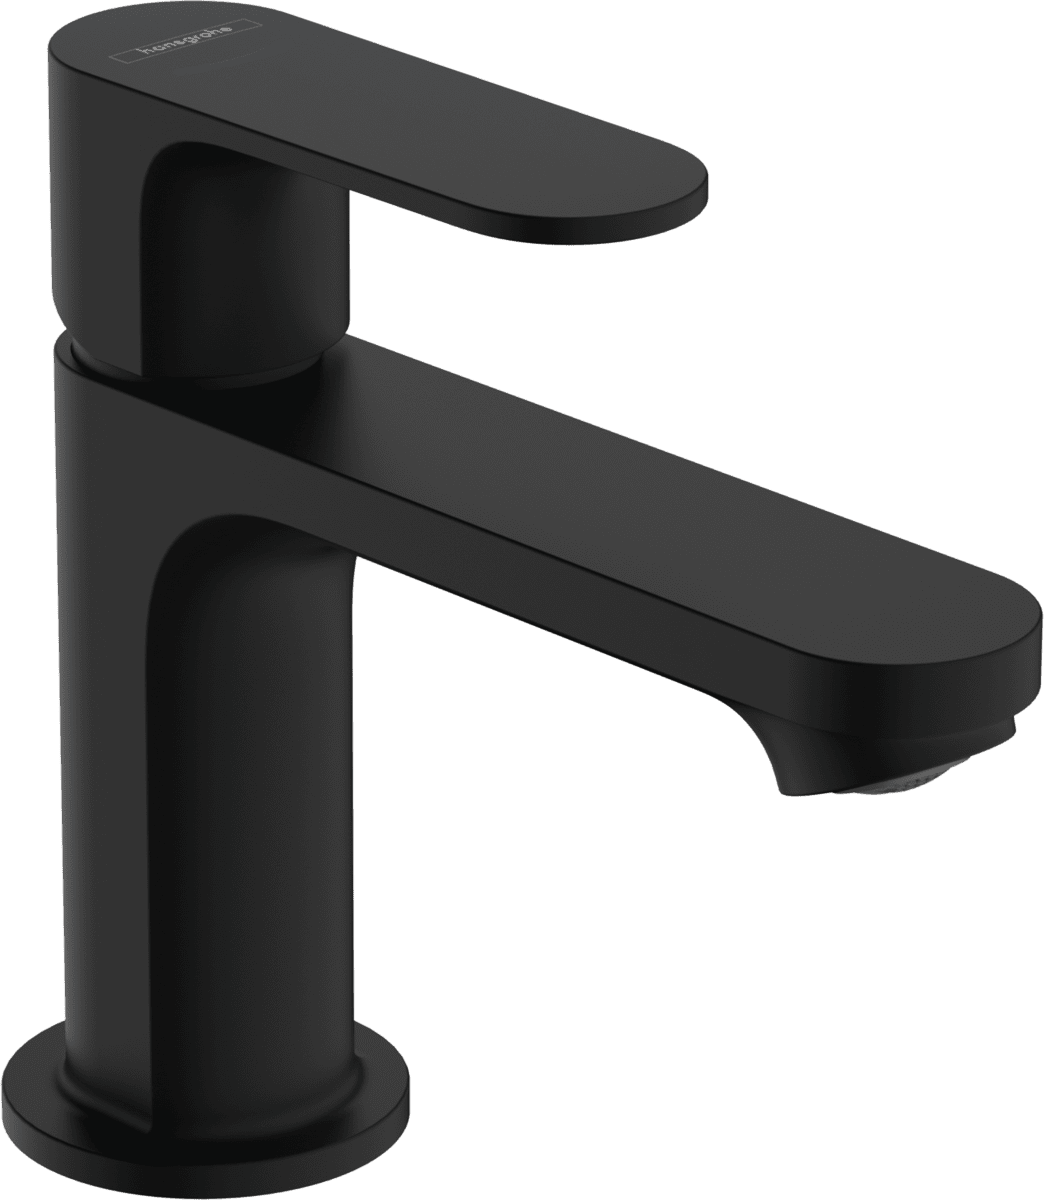 Picture of HANSGROHE Rebris S Pillar tap 80 with lever handle for cold water or pre-adjusted water without waste set #72503670 - Matt Black